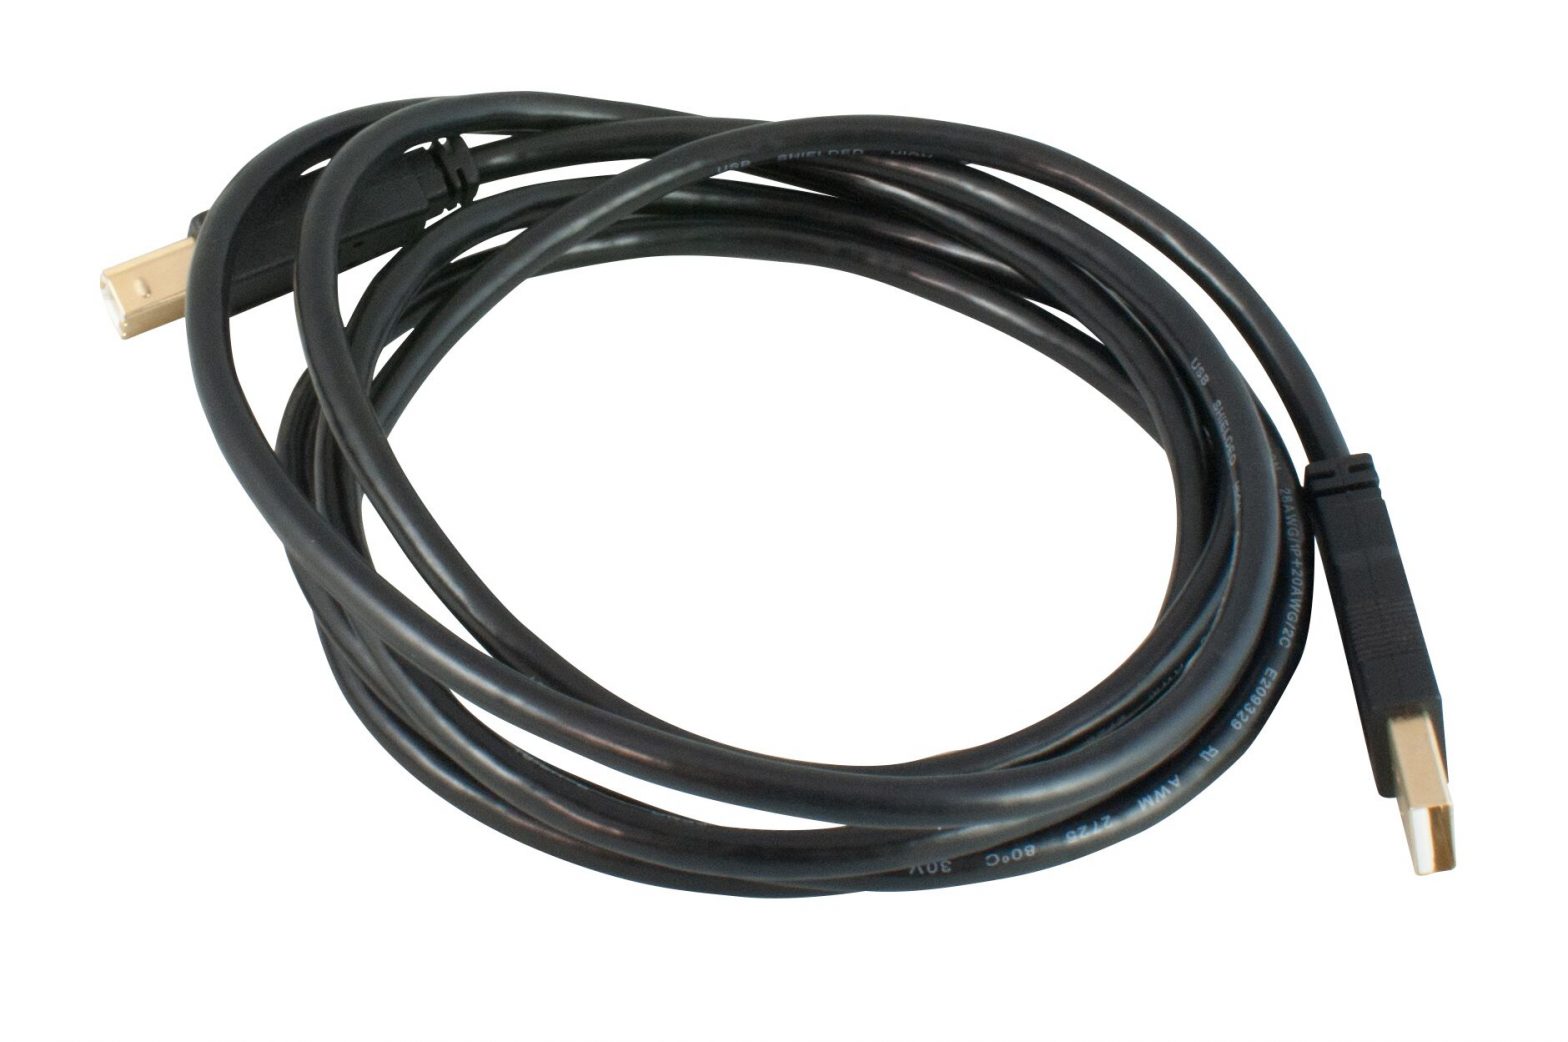 FX-i-OP-02 - A&D USB Interface Cable